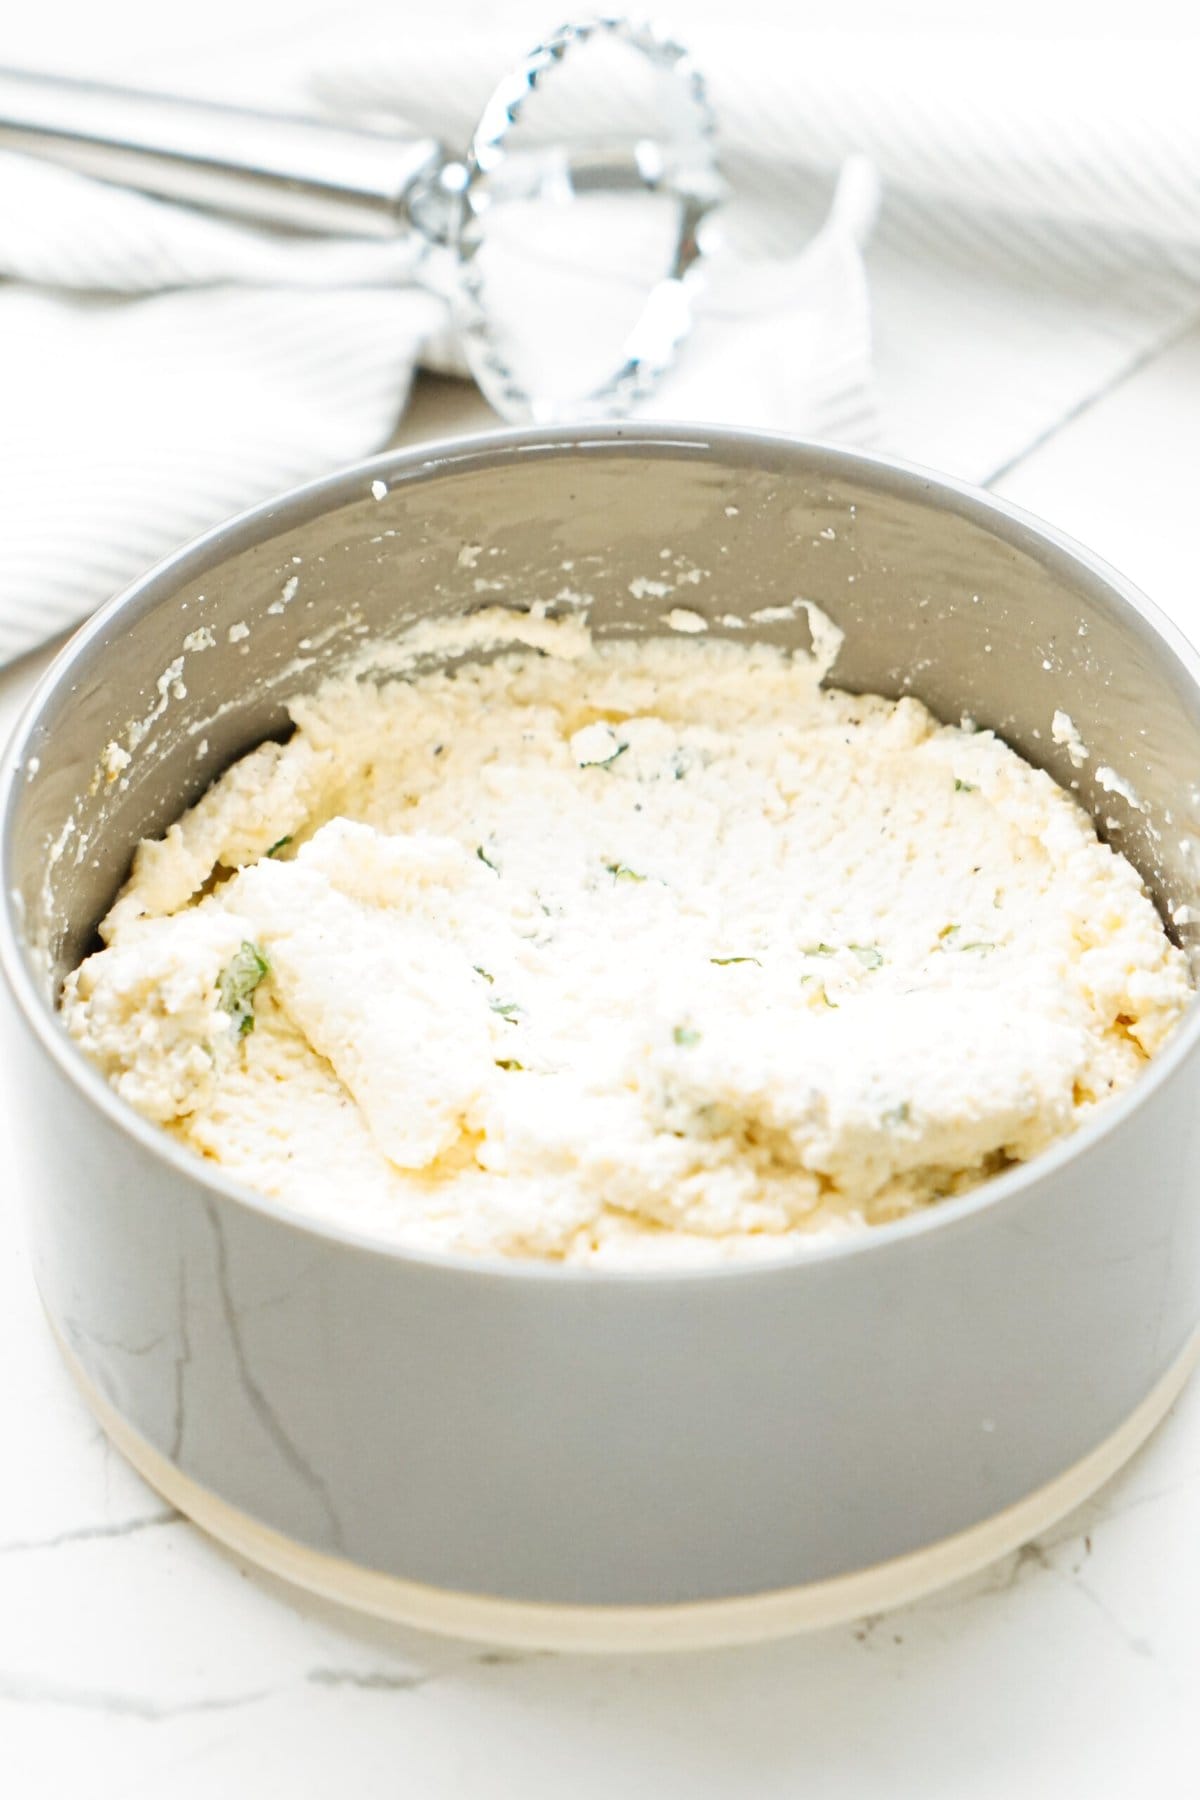 A bowl filled with a mixture of cheese and herbs.